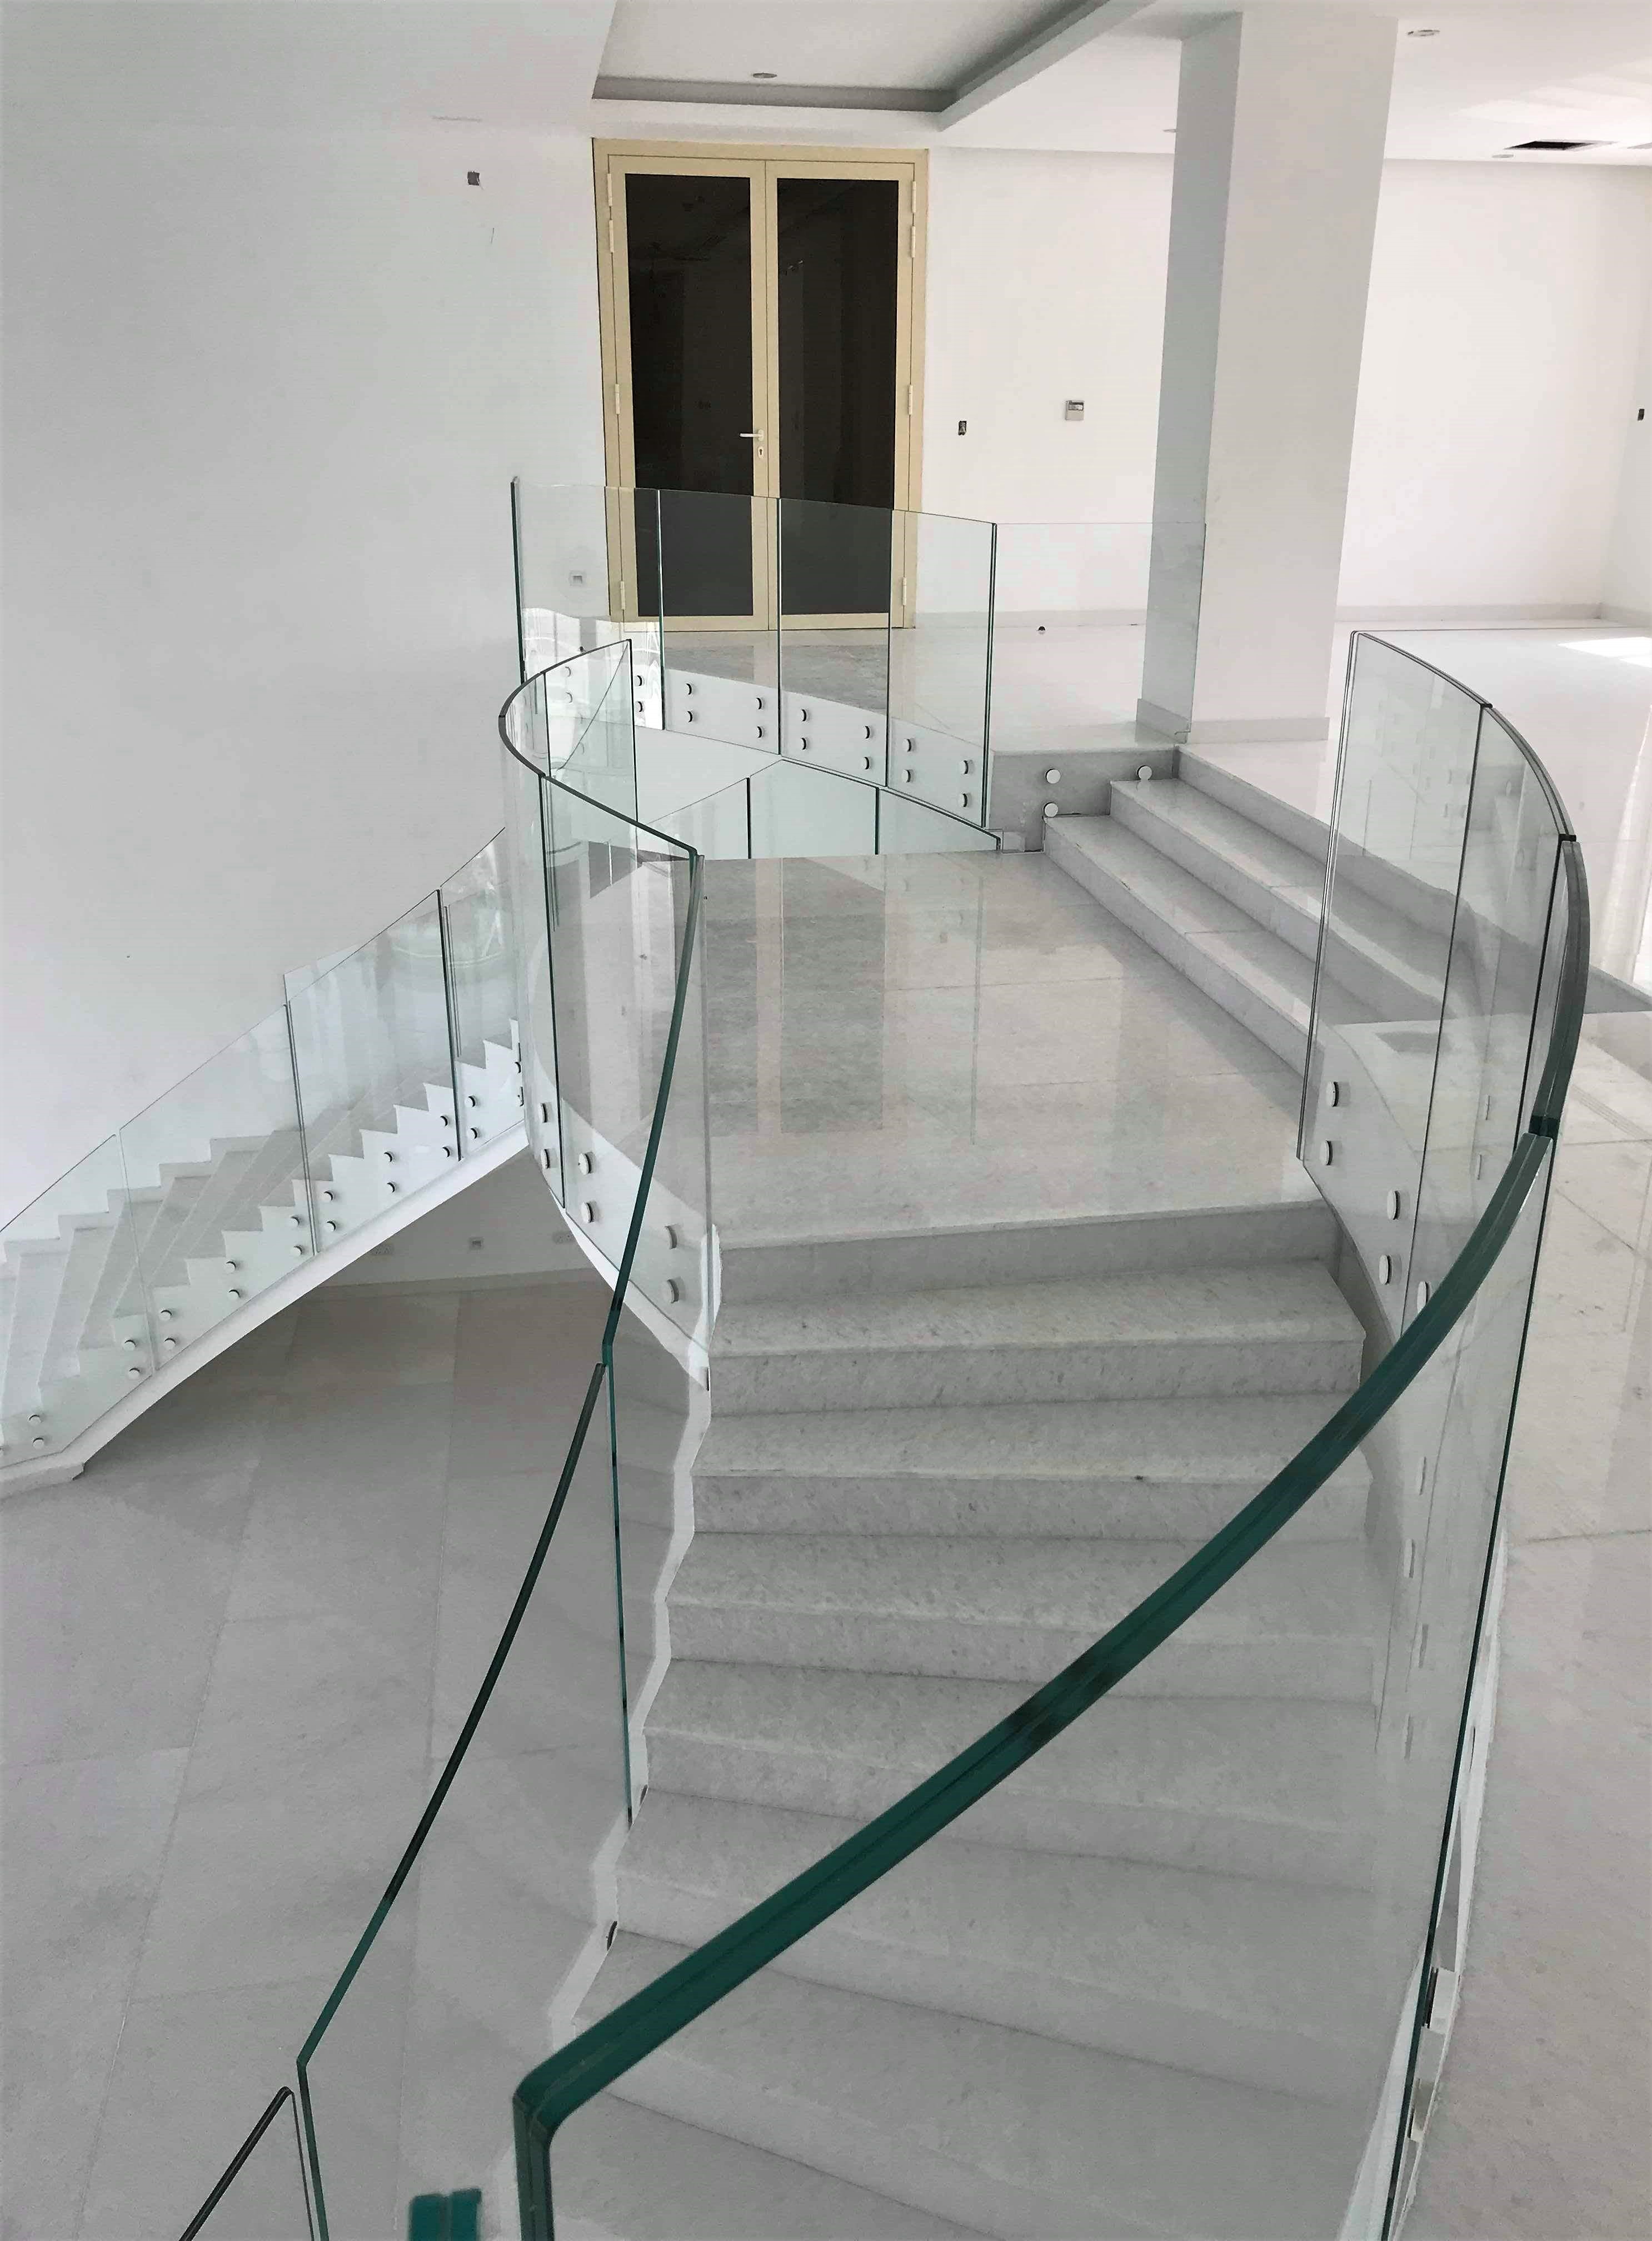 Spiral stair with glass holder